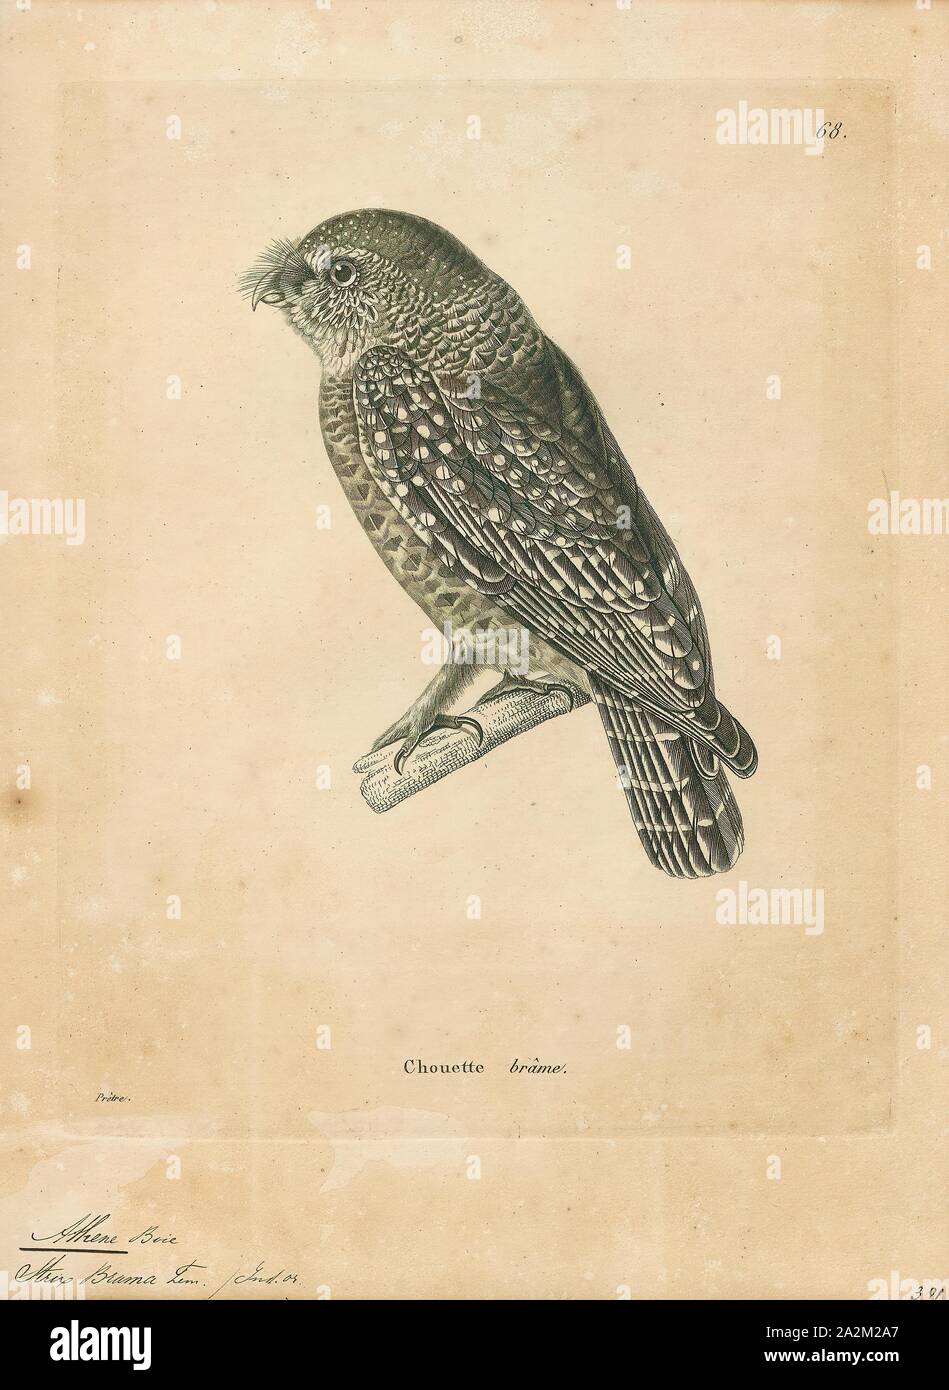 Athene brama, Print, The spotted owlet (Athene brama) is a small owl which breeds in tropical Asia from mainland India to Southeast Asia. A common resident of open habitats including farmland and human habitation, it has adapted to living in cities. They roost in small groups in the hollows of trees or in cavities in rocks or buildings. It nests in a hole in a tree or building, laying 3–5 eggs. They are often found near human habitation. The species shows great variation including clinal variation in size and forms a superspecies with the very similar little owl., 1700-1880 Stock Photo